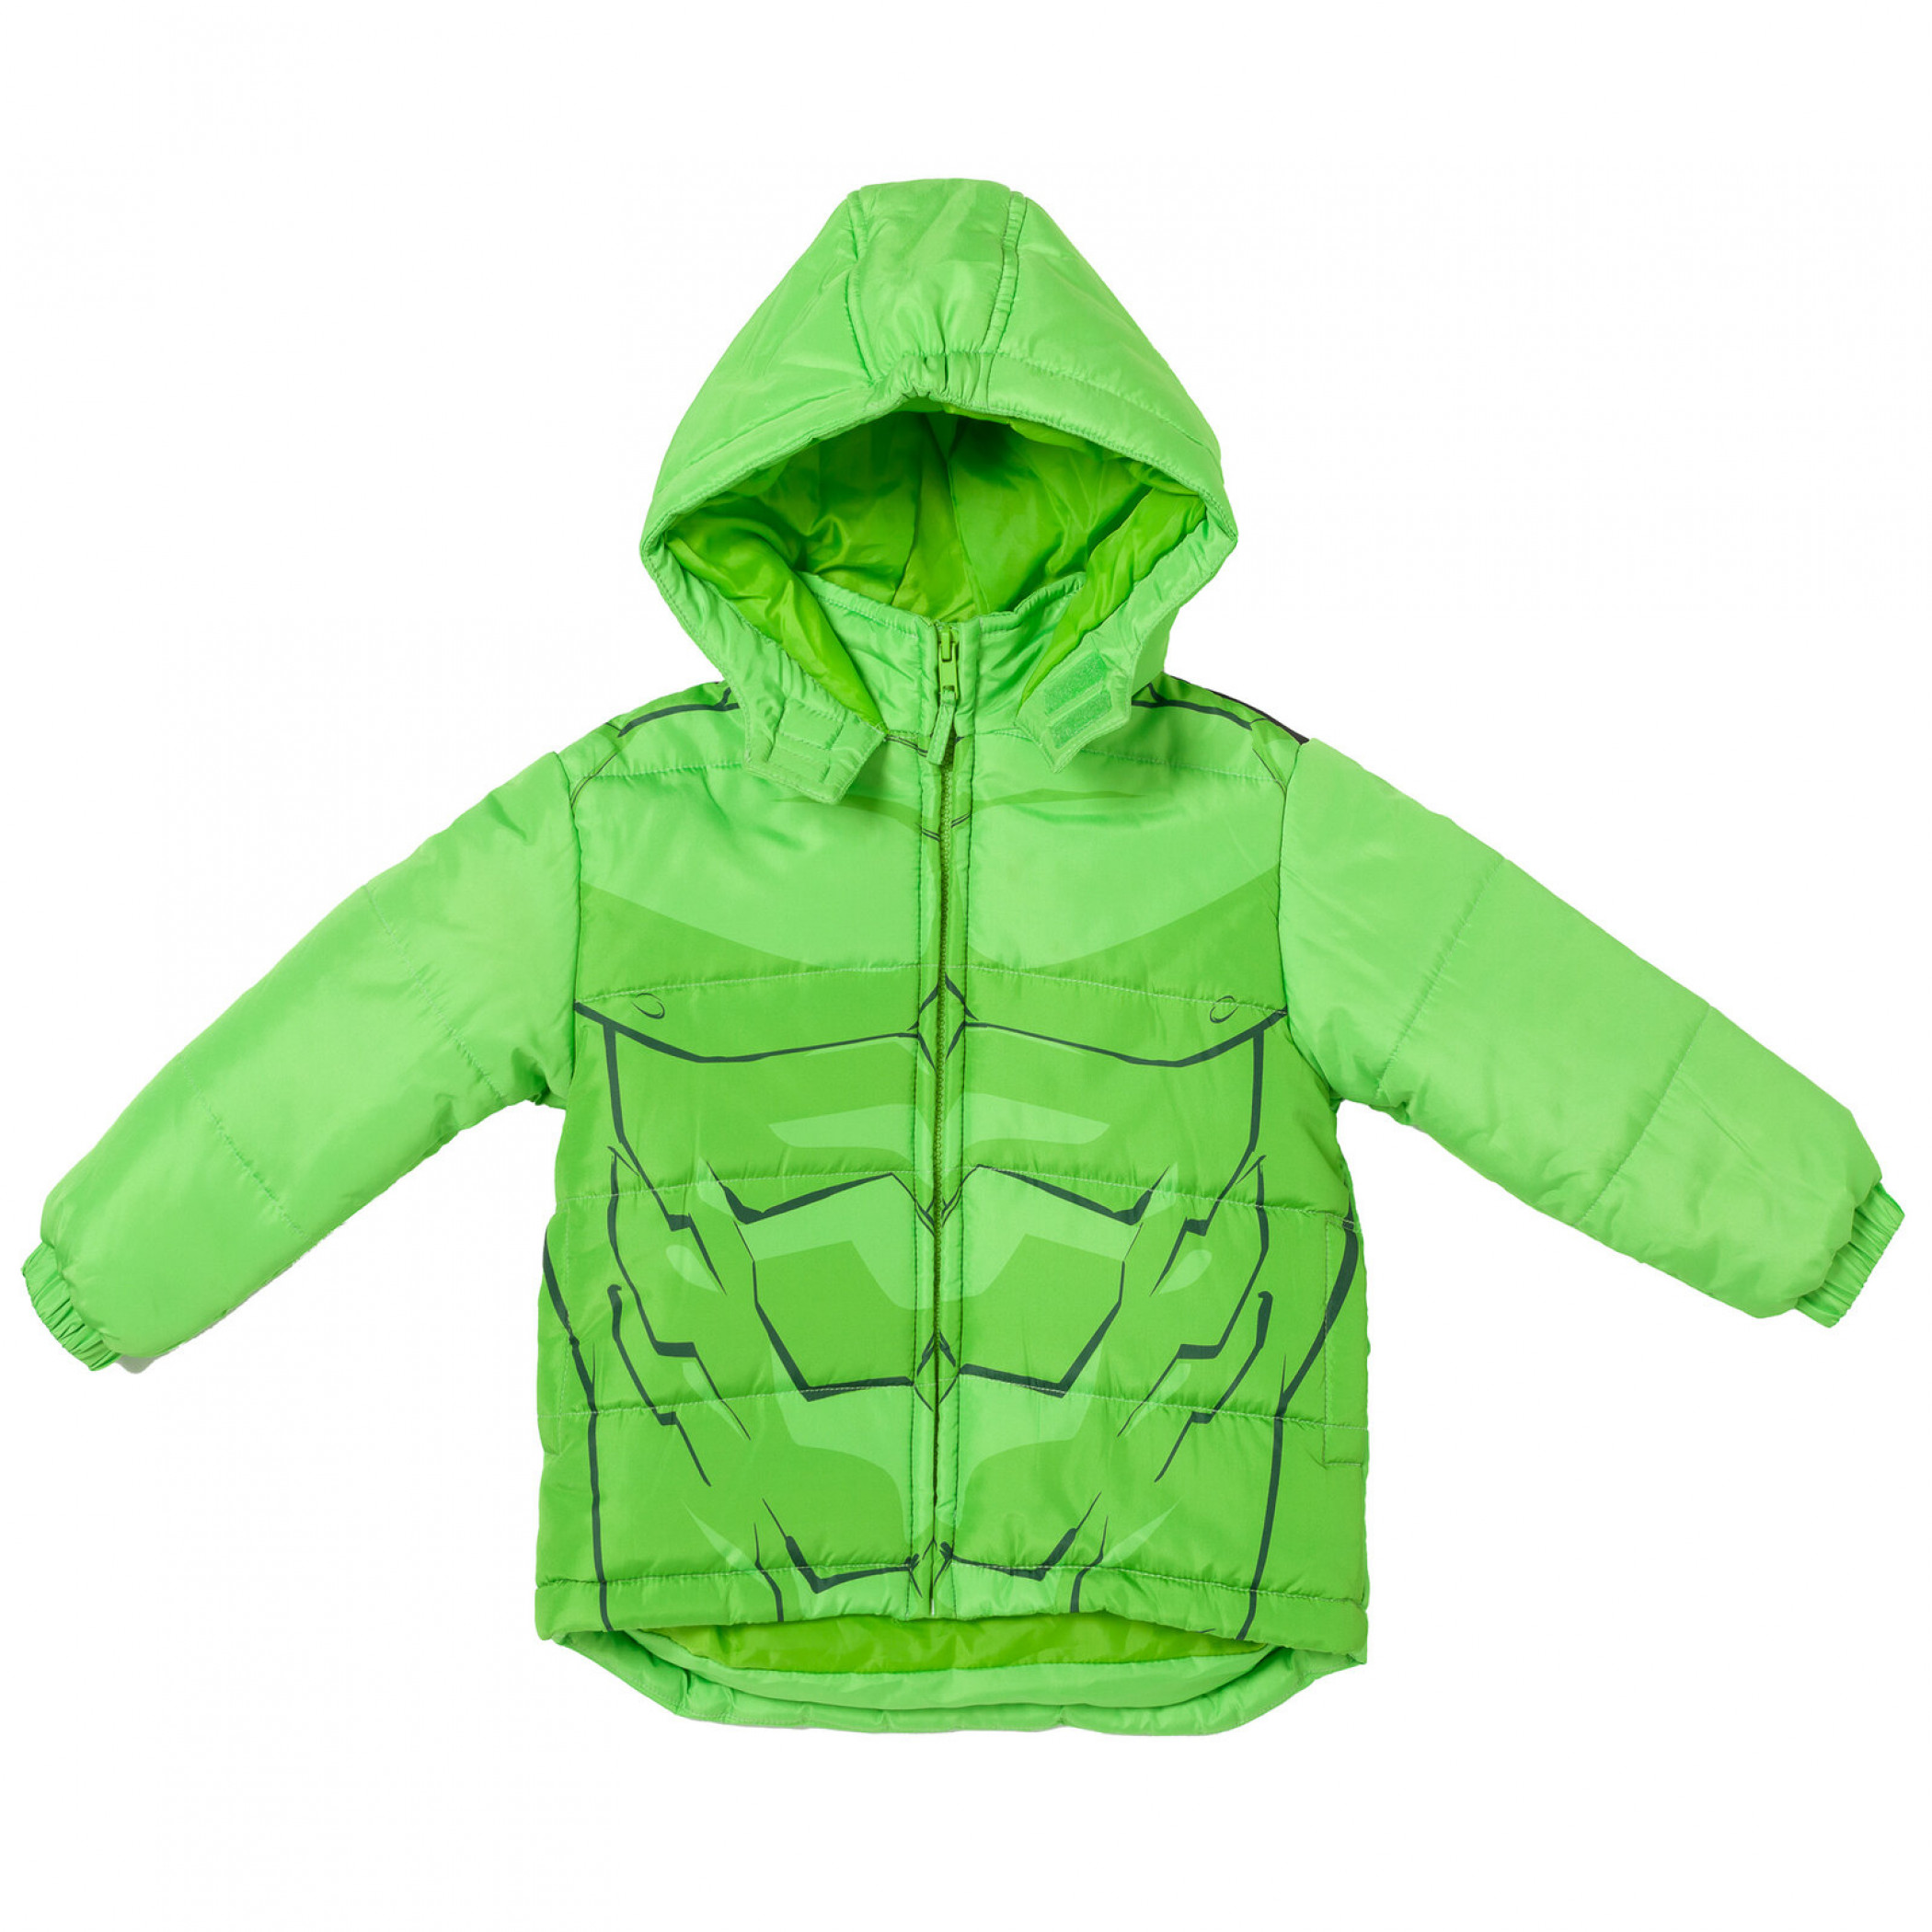 The Incredible Hulk Muscles Puffy Kid's Jacket